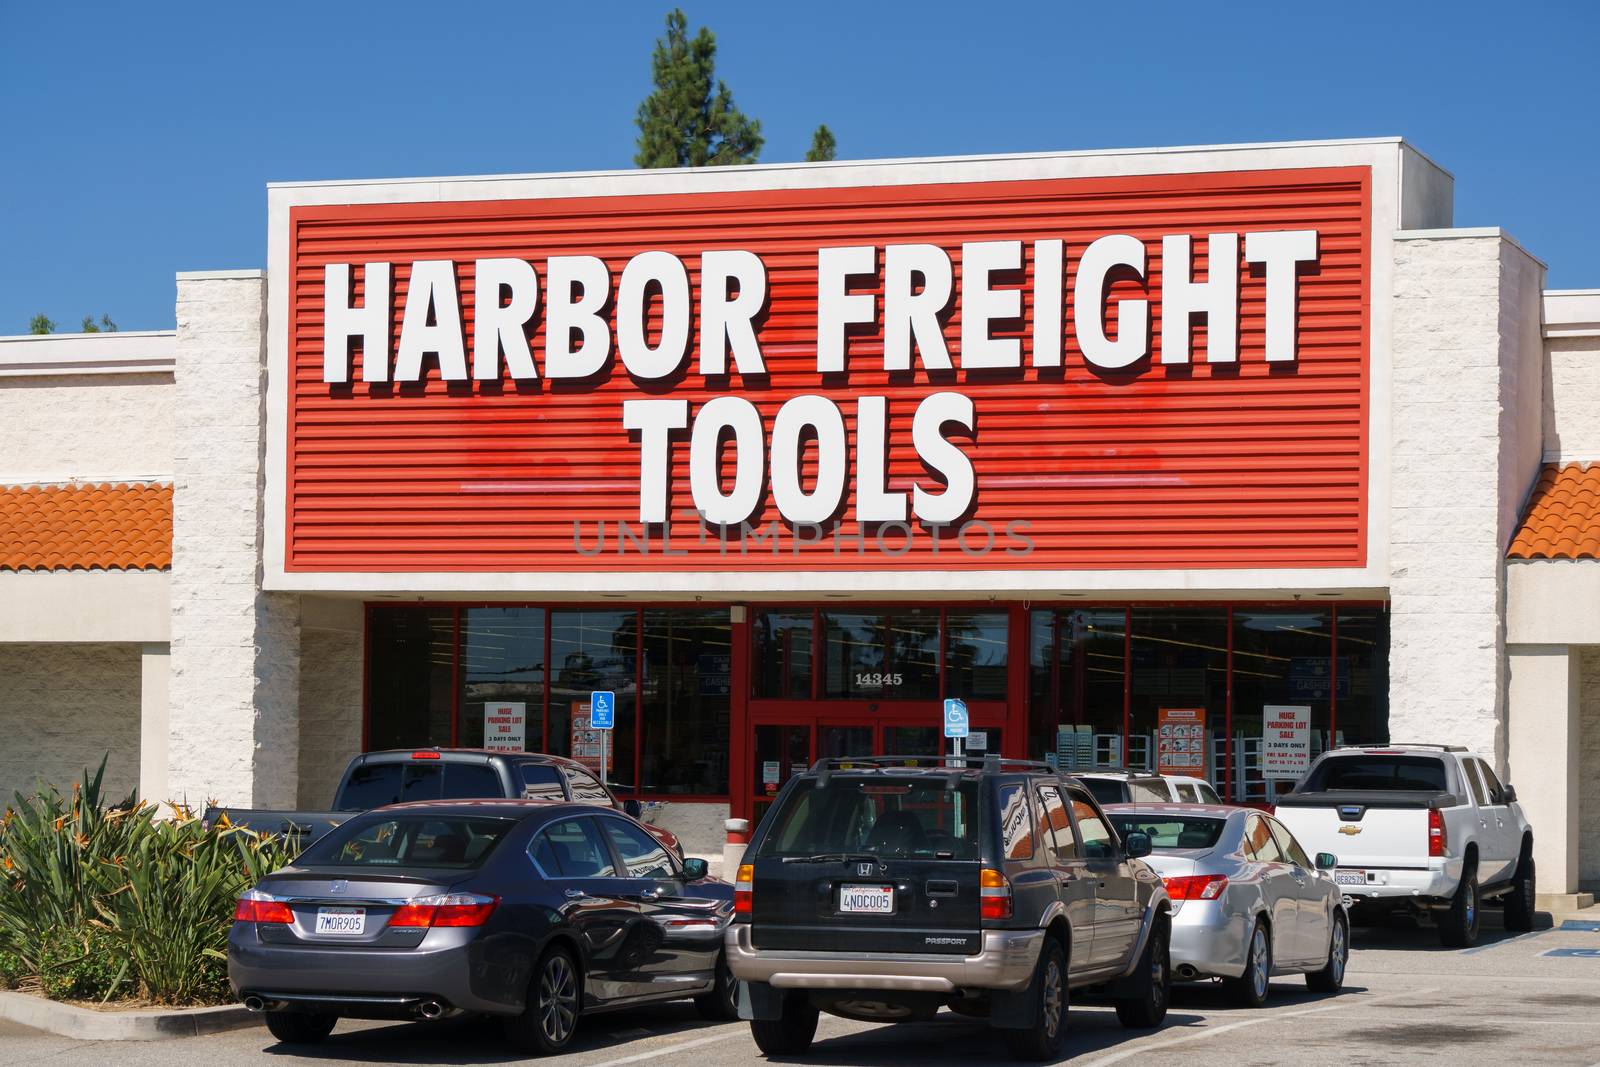 Harbor Freight Tools Retail Store by wolterk